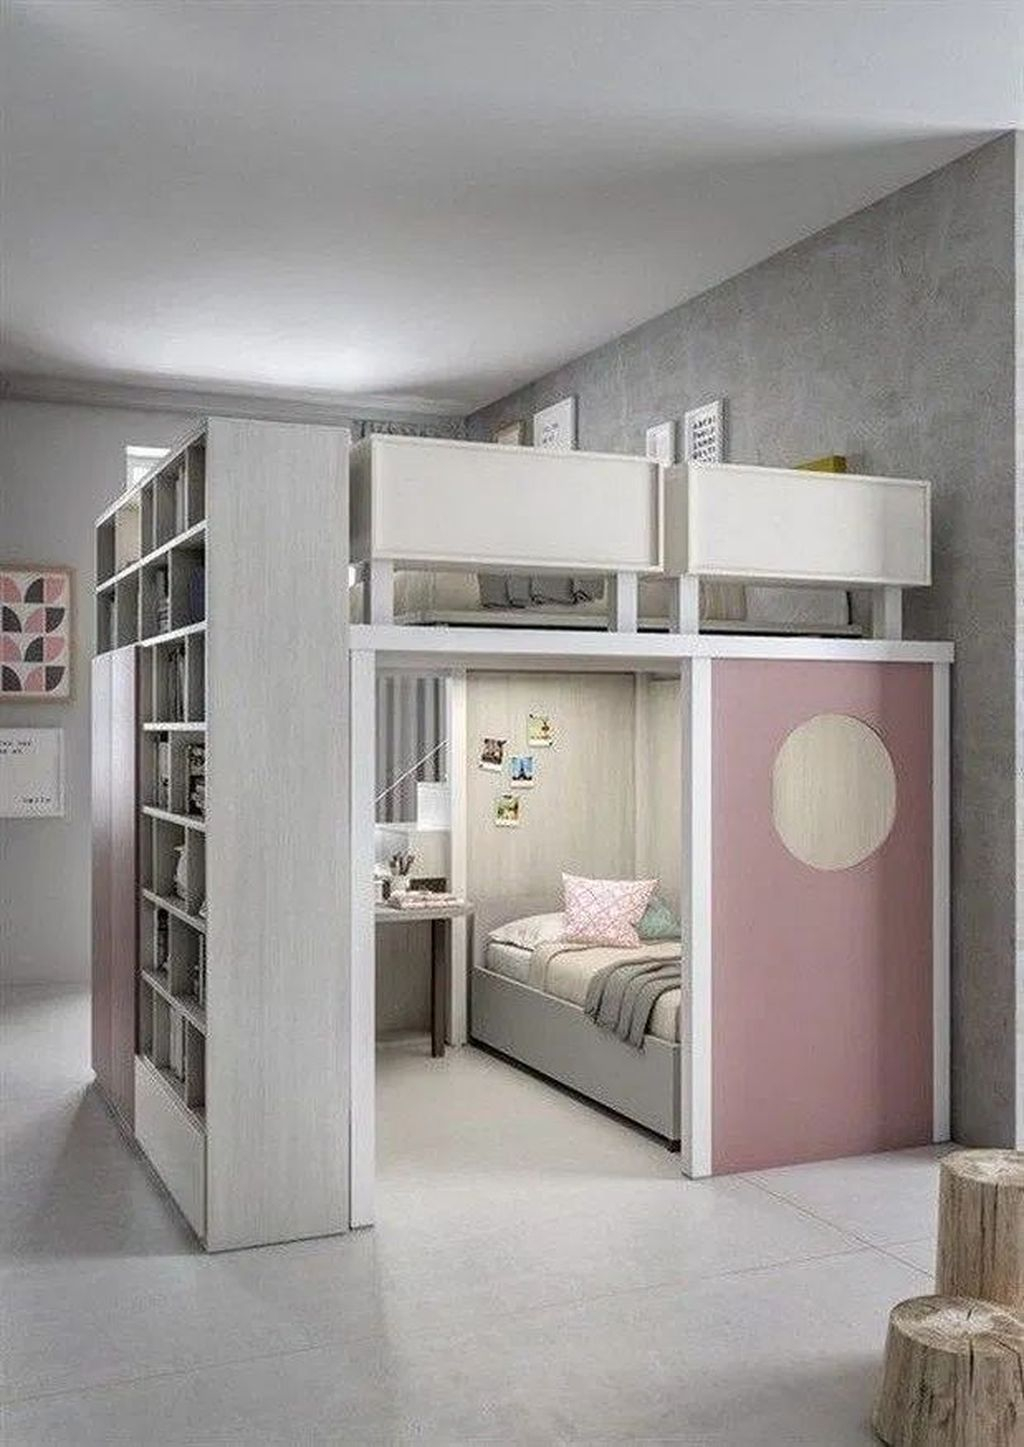 Stunning Teens Bedrooms Design Ideas For Small Spaces To Try 29